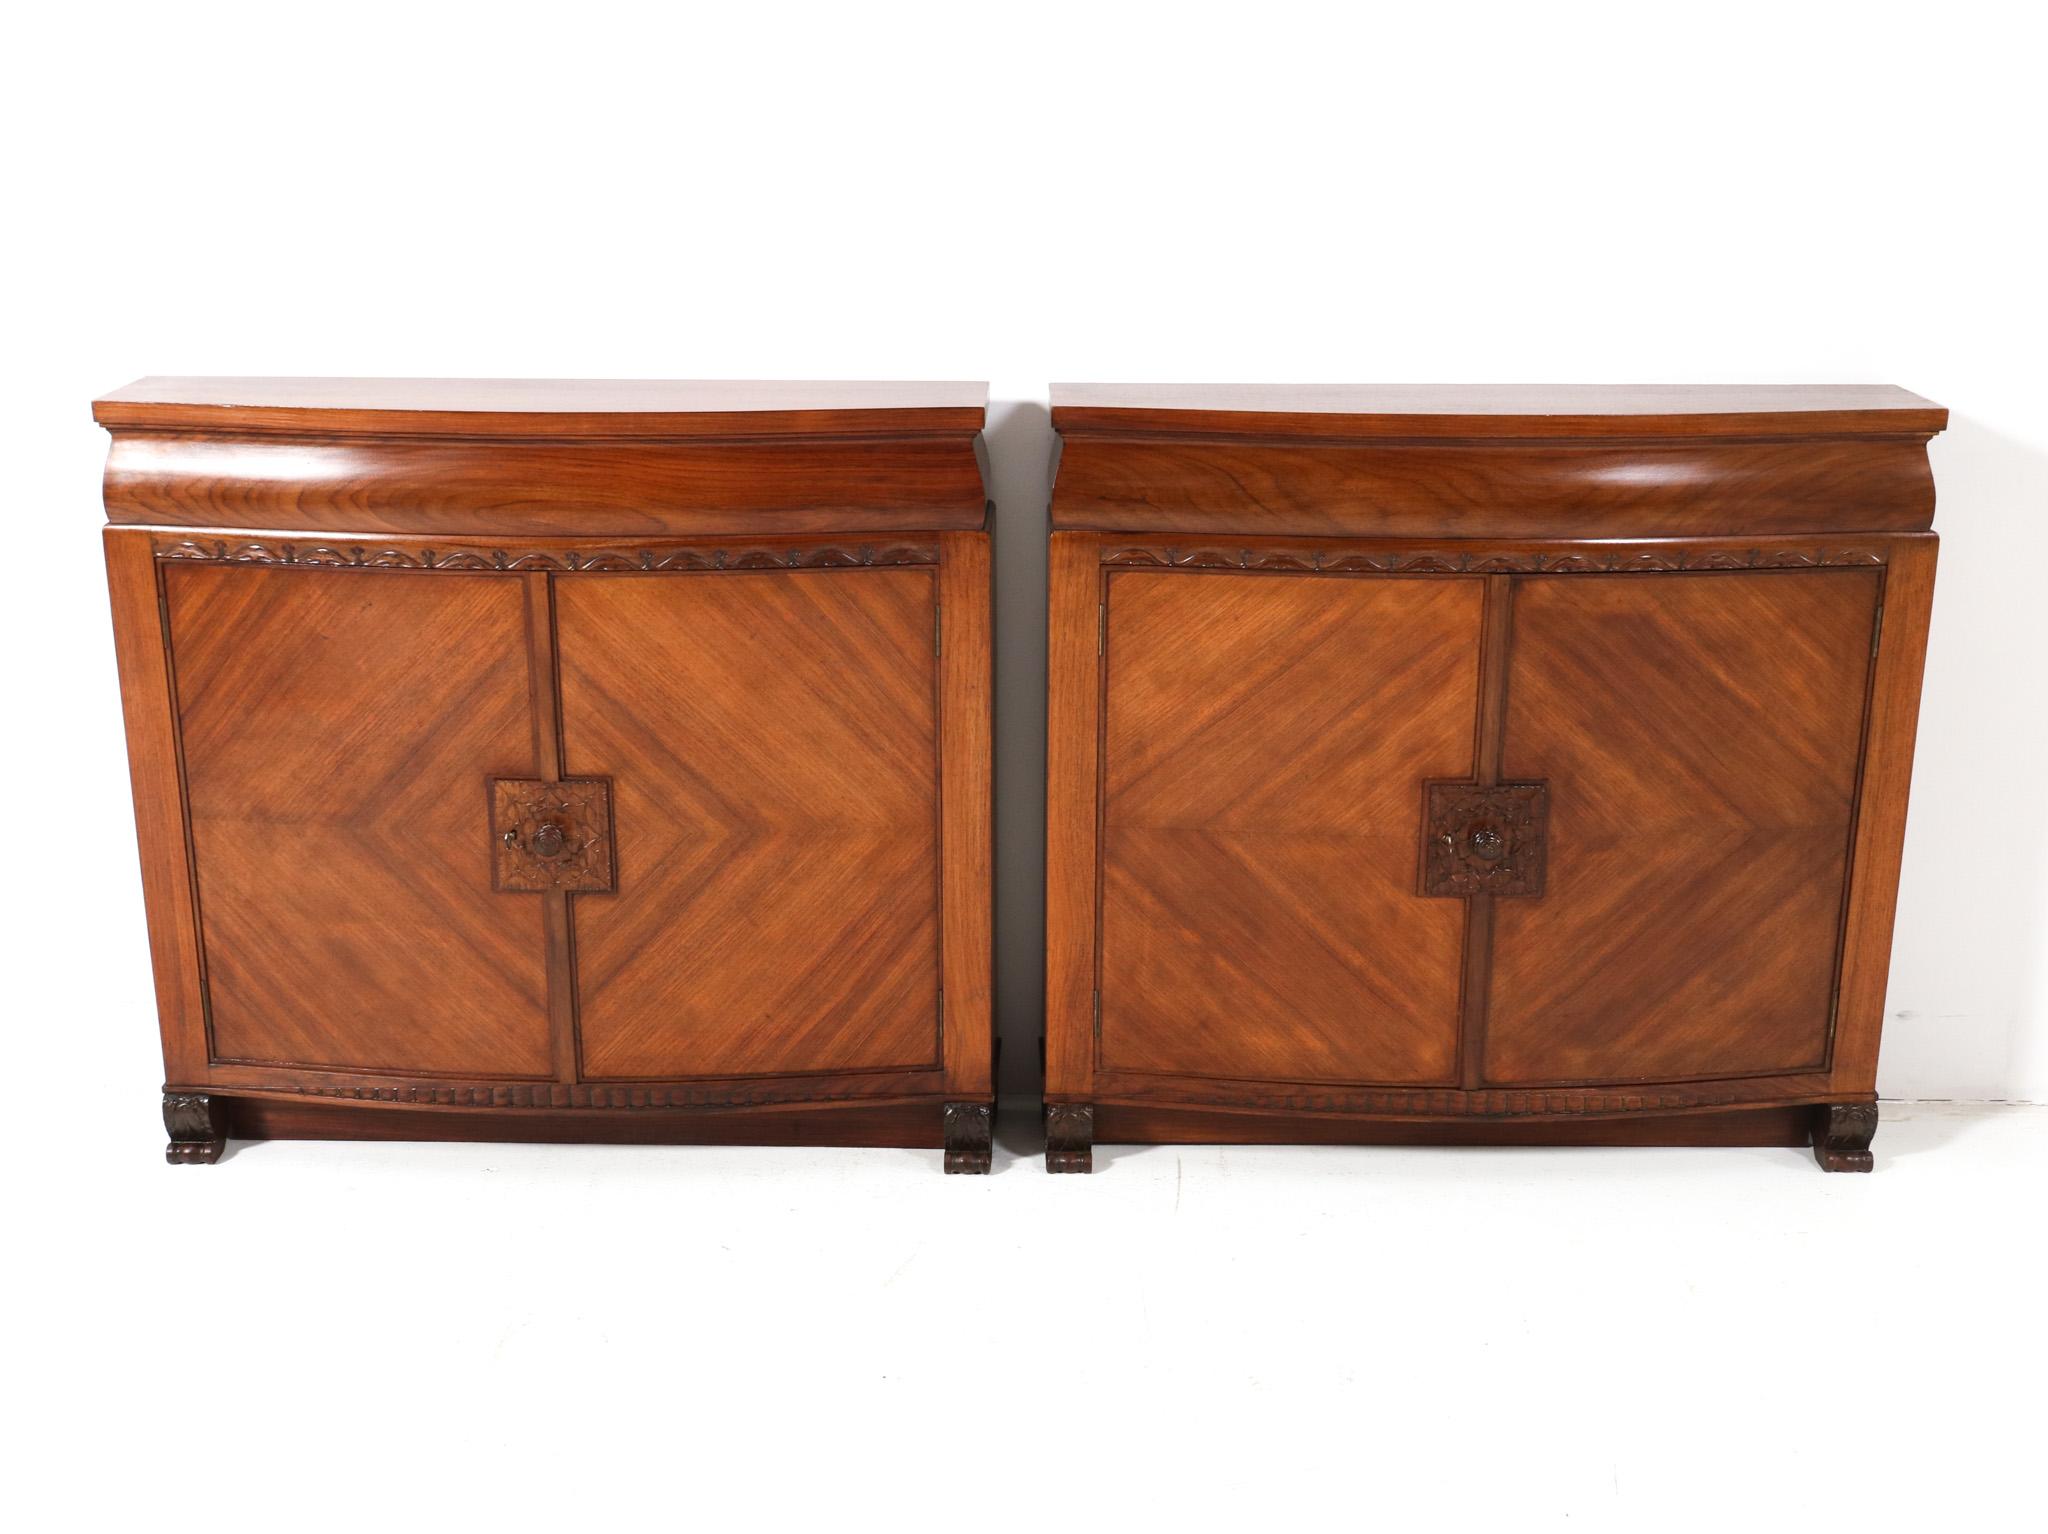 Magnificent and rare pair of Art Deco cabinets.
Design by Napoleon Le Grand for 't Modelhuis N. Legrand Amsterdam.
Striking Dutch design from the 1920s.
Solid padouk and original padouk veneer.
This wonderful pair of Art Deco cabinets by Napoleon Le